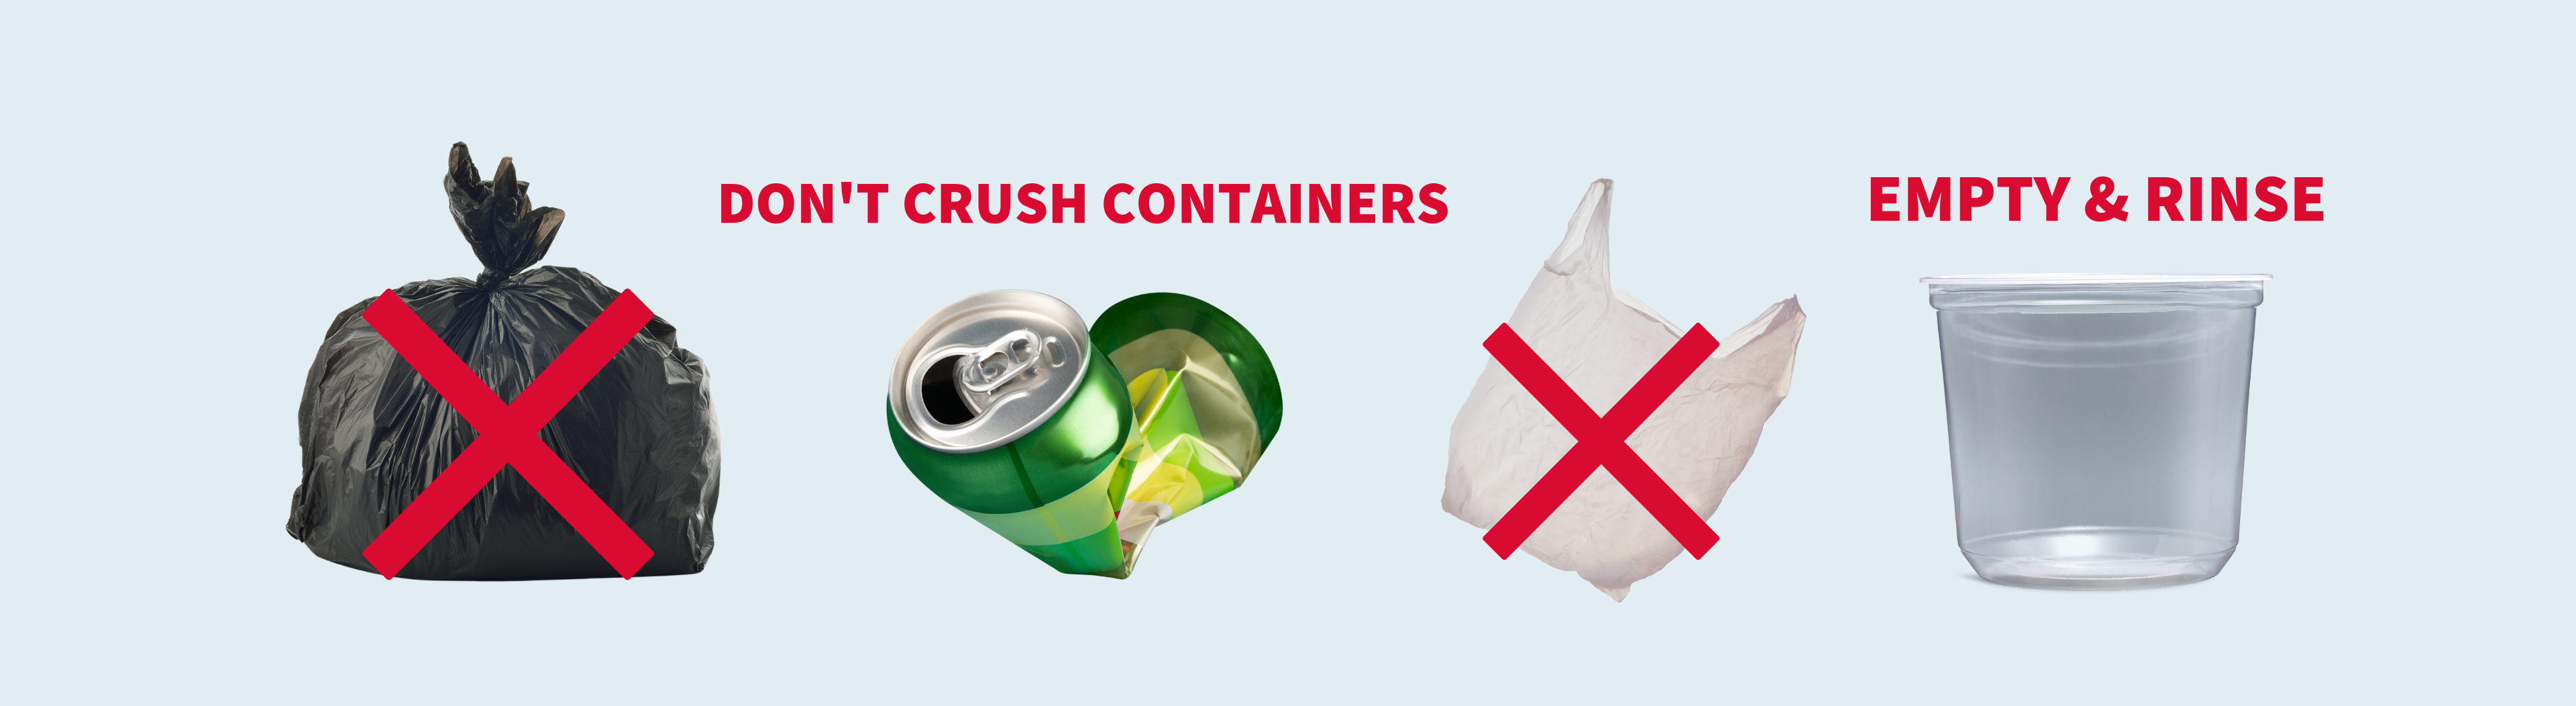 Keep plastic bags out of the recycling, don't crush containers, empty and clean recyclables.